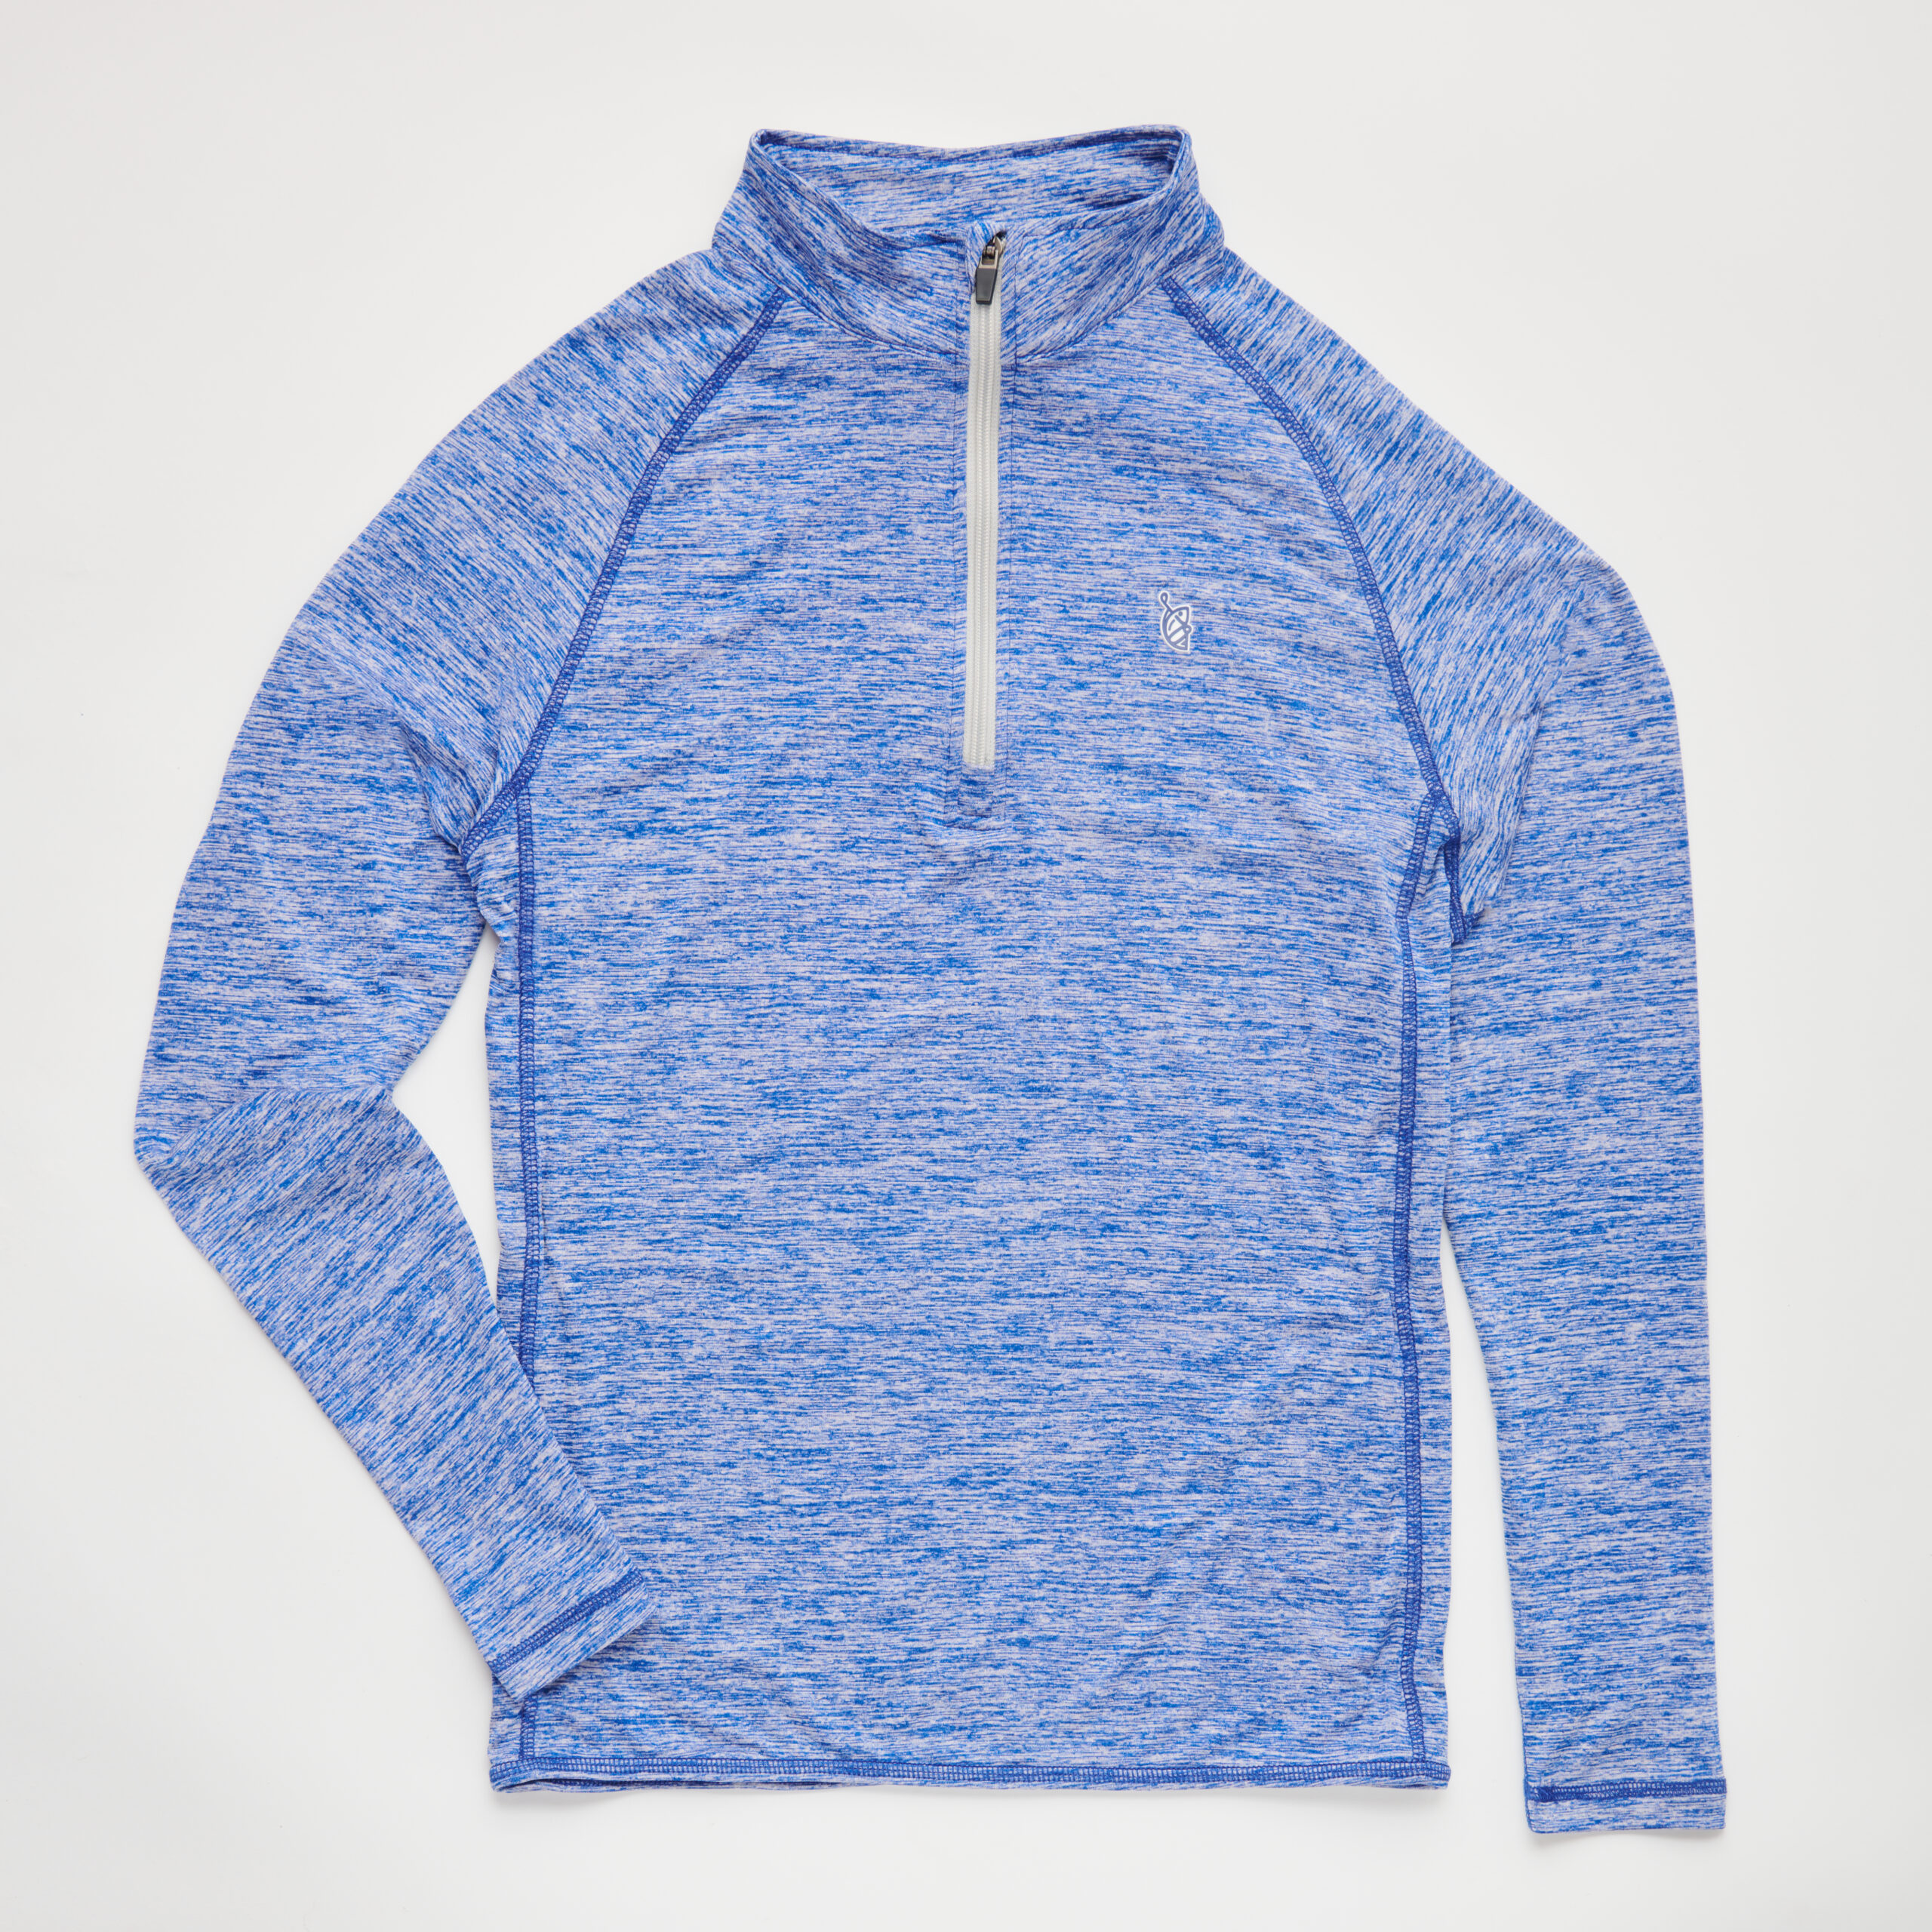 Golf Apparel - Order Our Golfish 1/4 Zip Today!